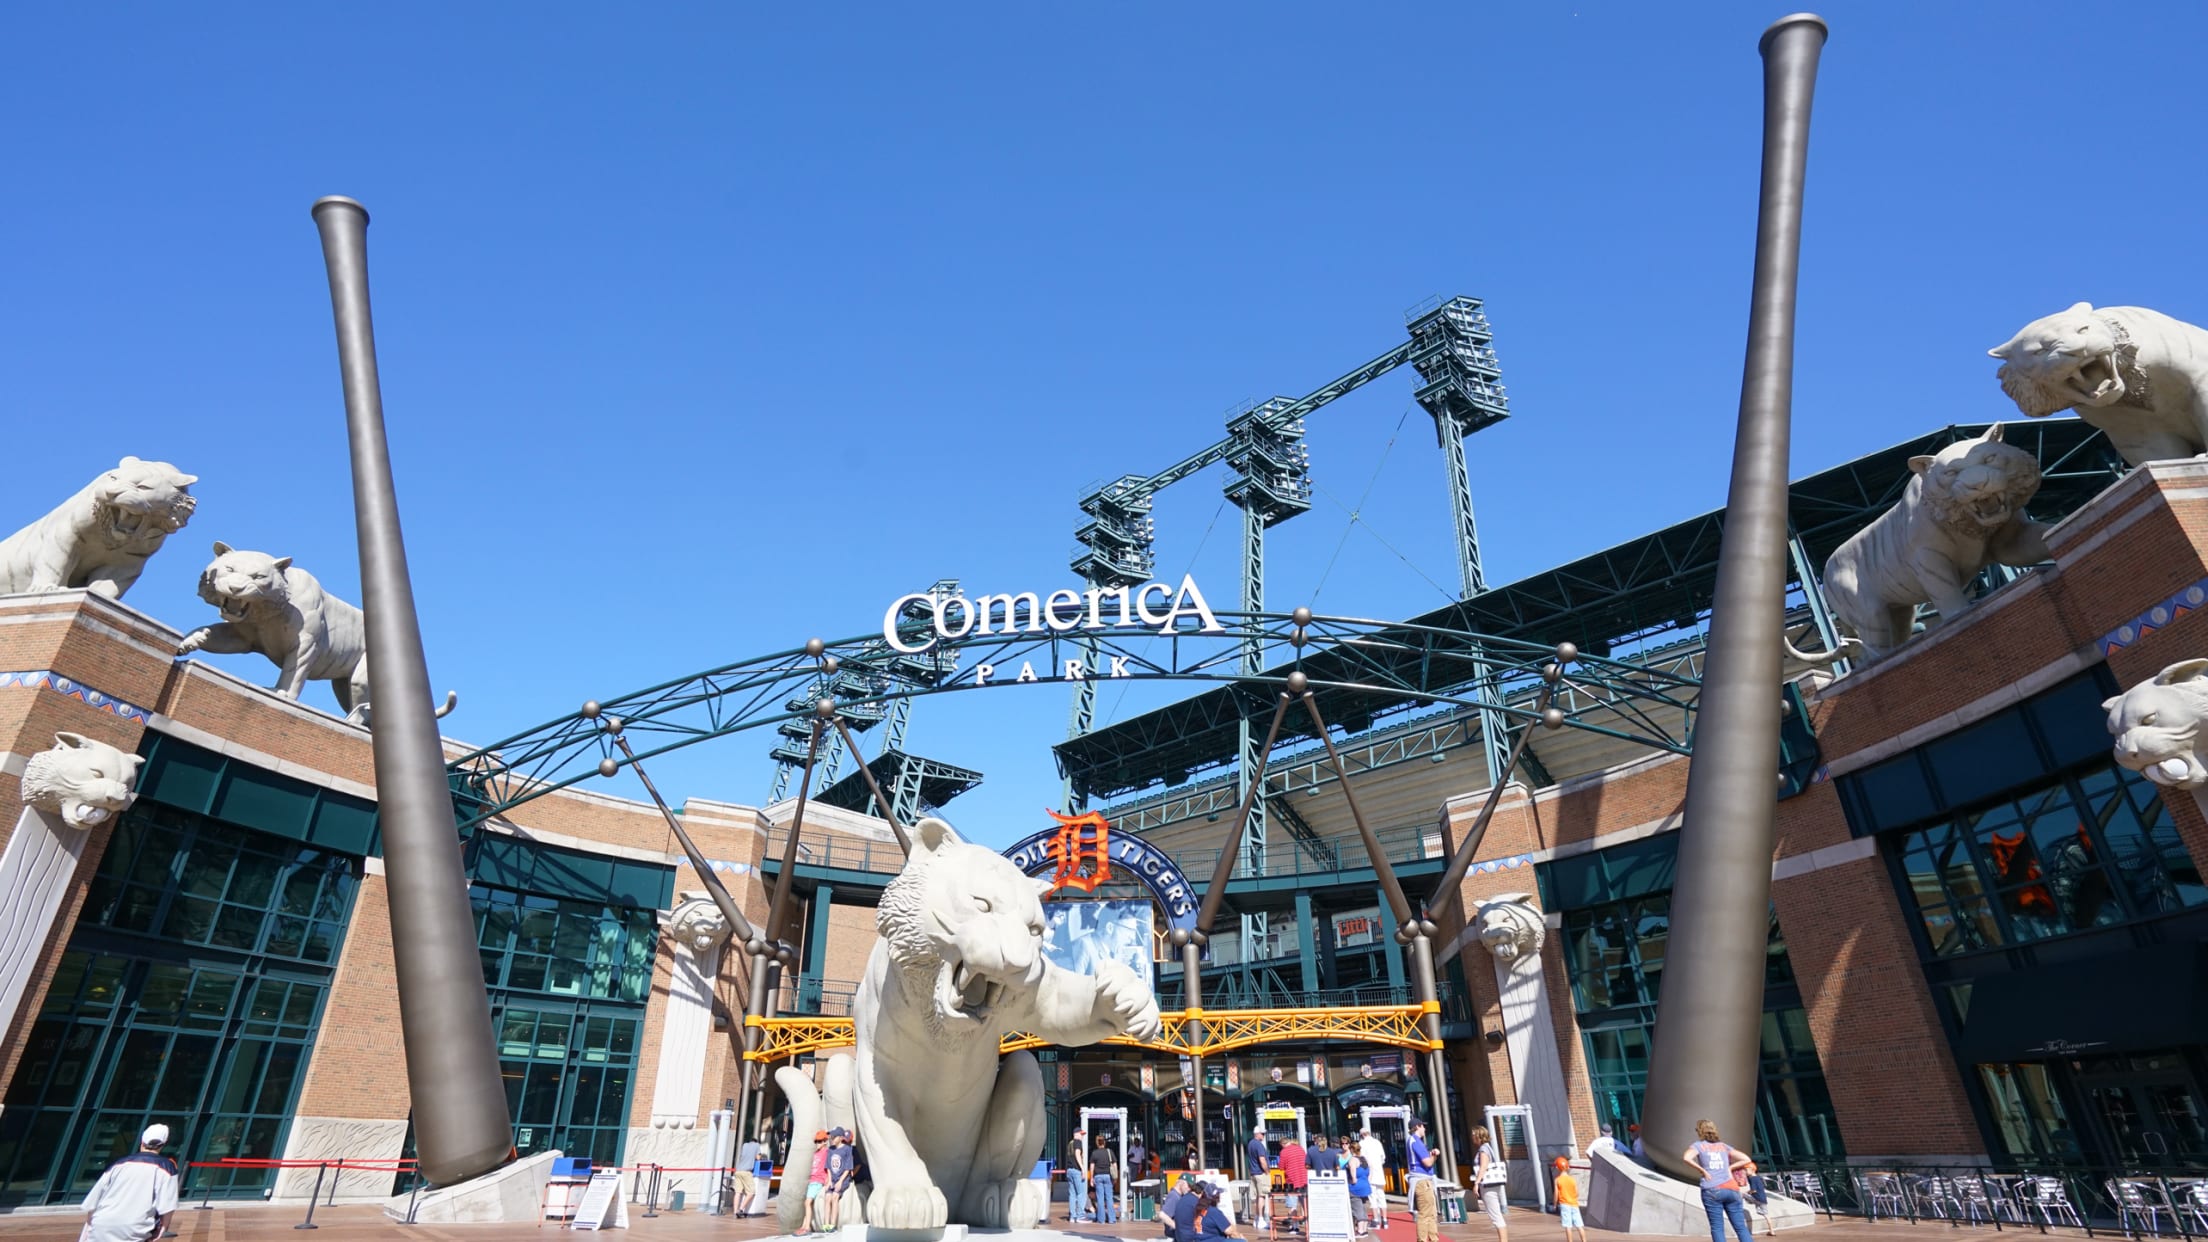 Baseball, beer and the boys of summer at Detroit's Comerica Park